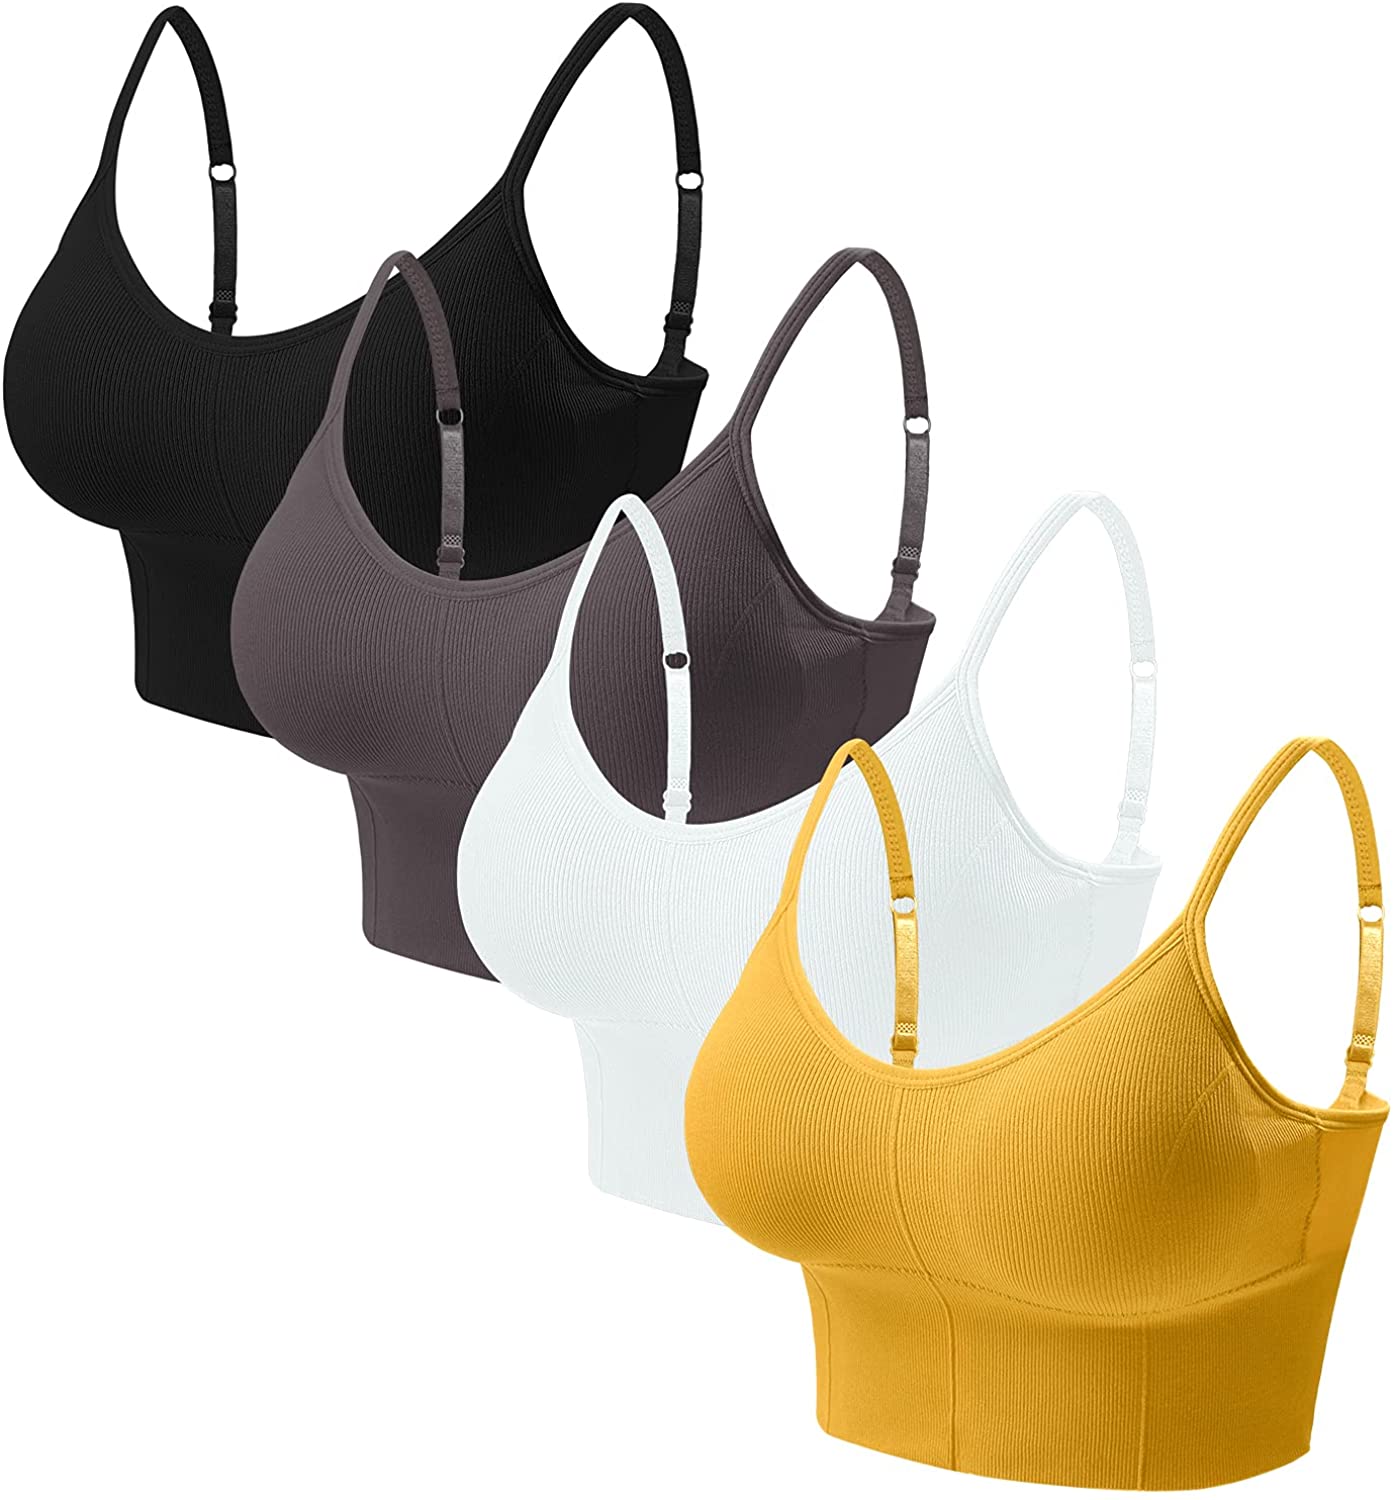 Eleplus 4 Pieces Comfy Sleep Bra for Women Cami Lounge Bra Wirefree Padded Bralettes Longline Pack of 4